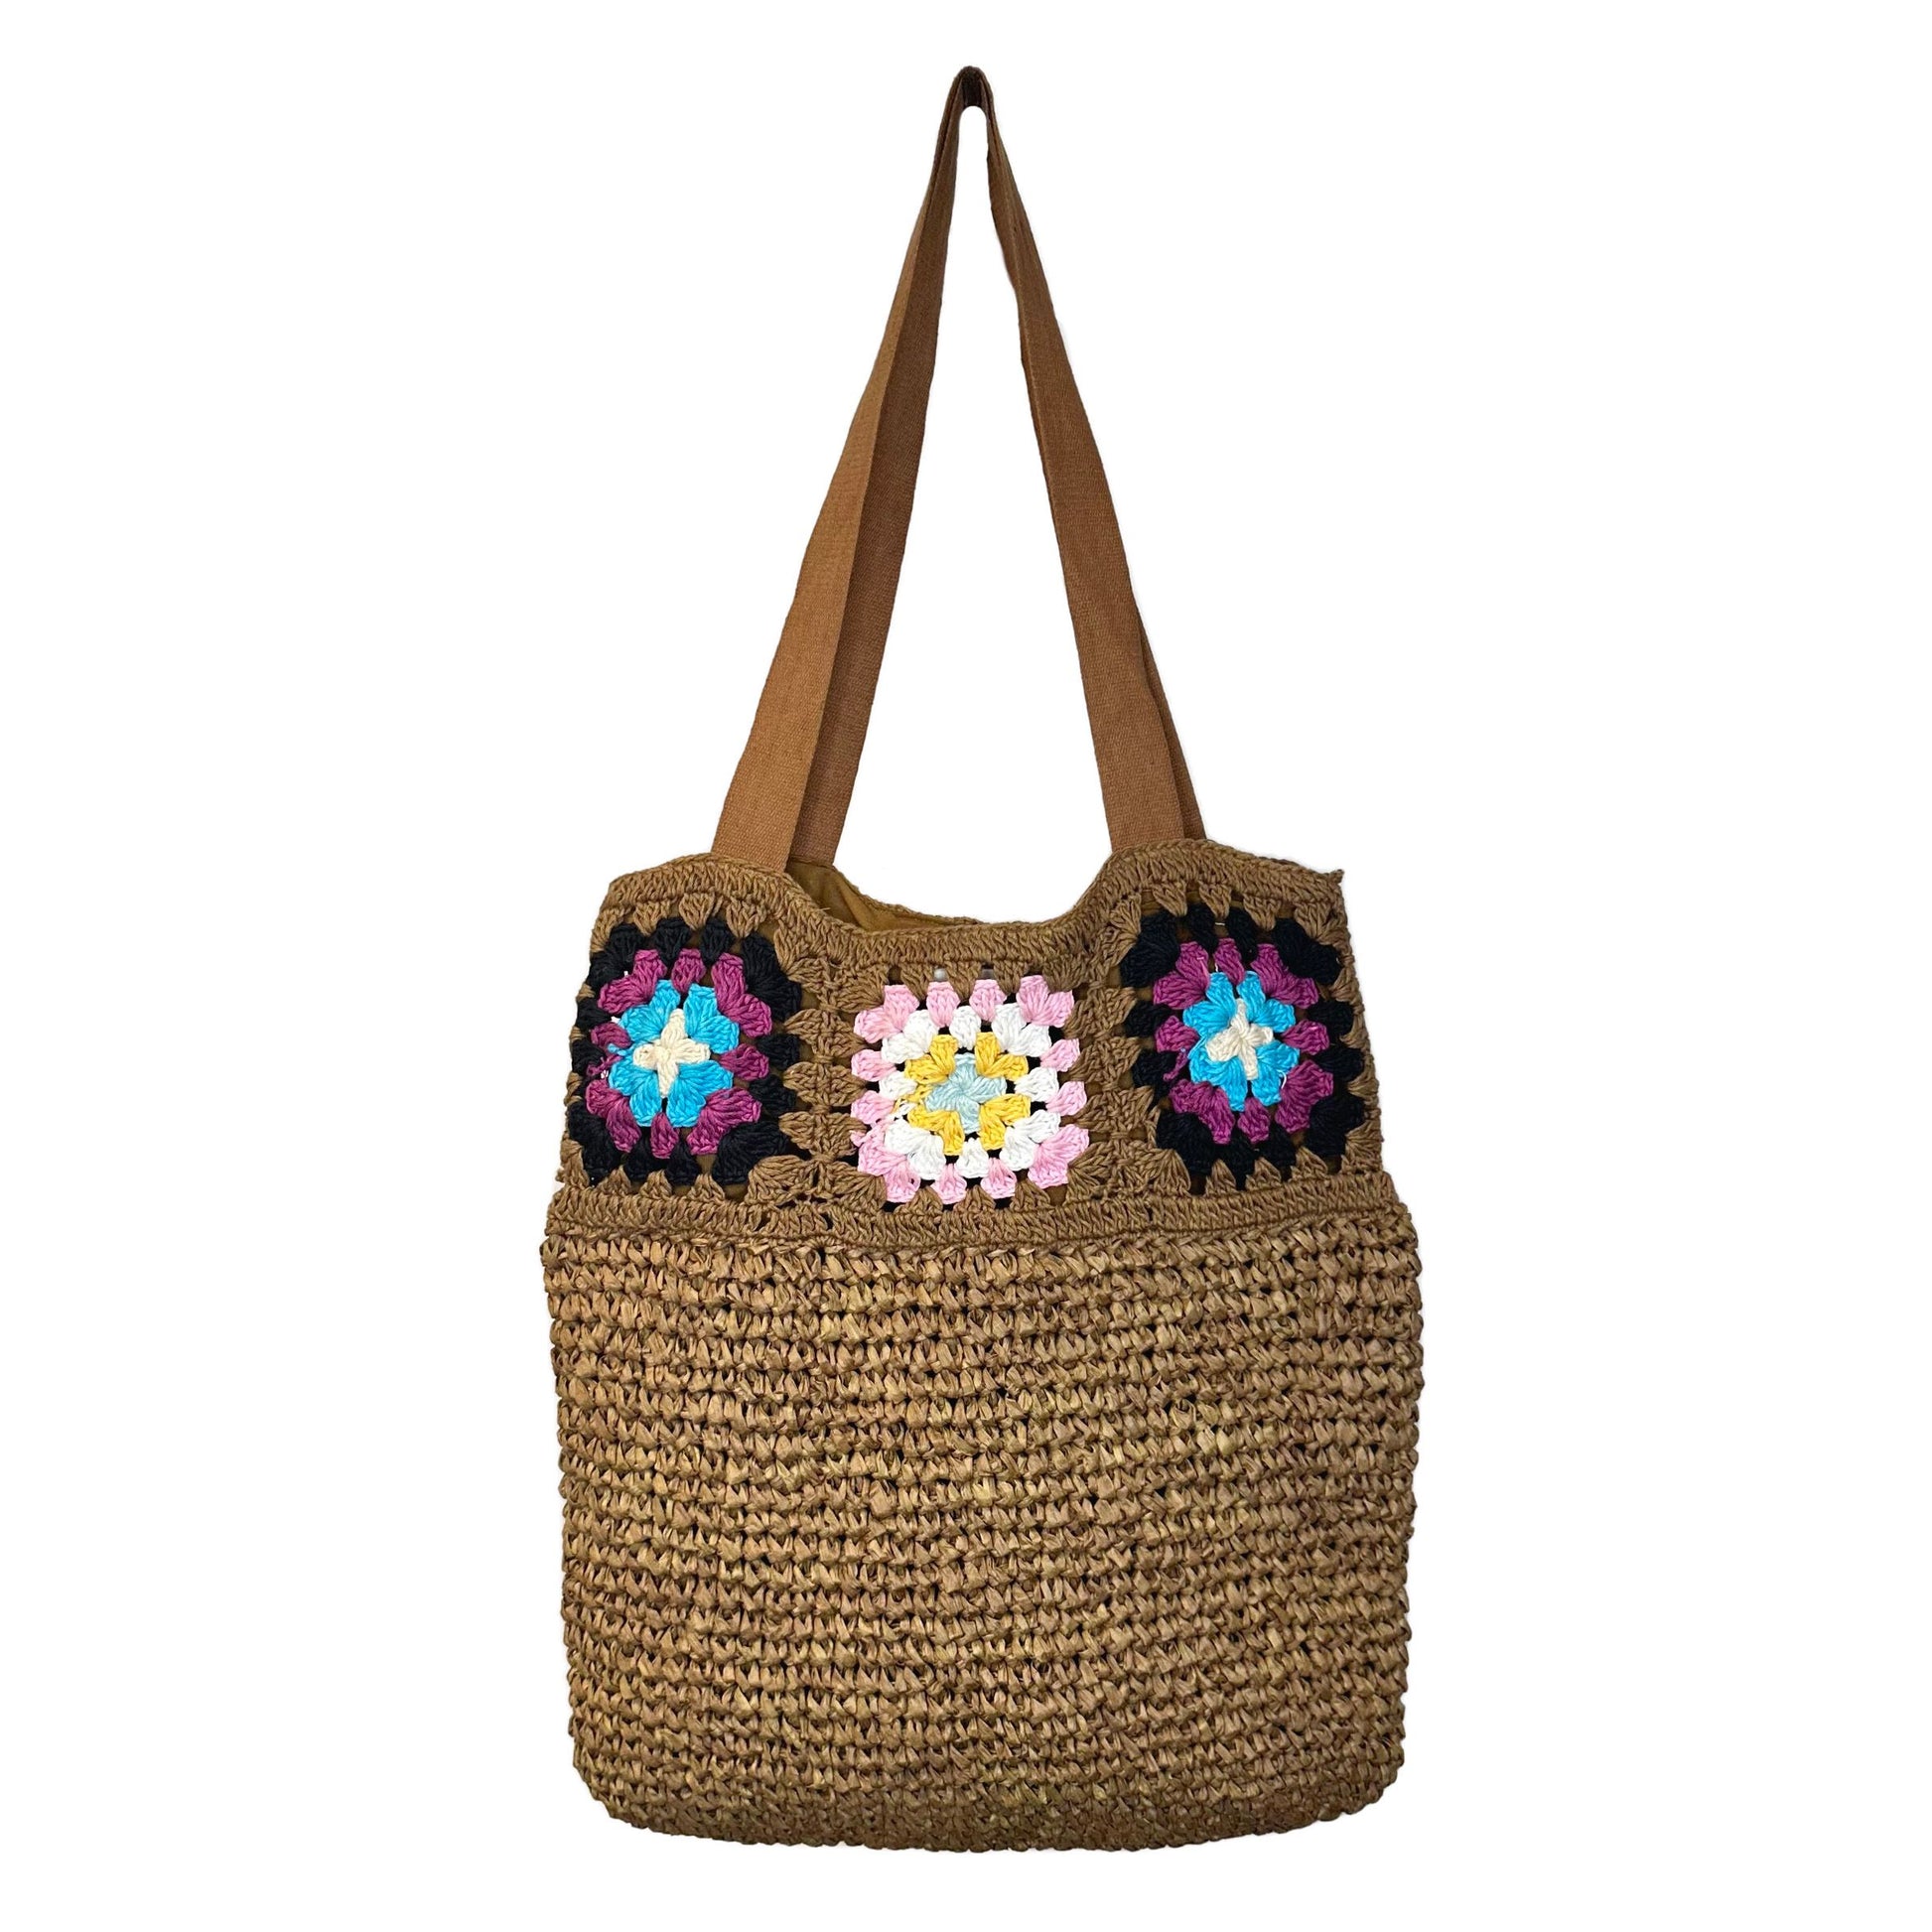 crochet brown jute bag with granny square top boarder.